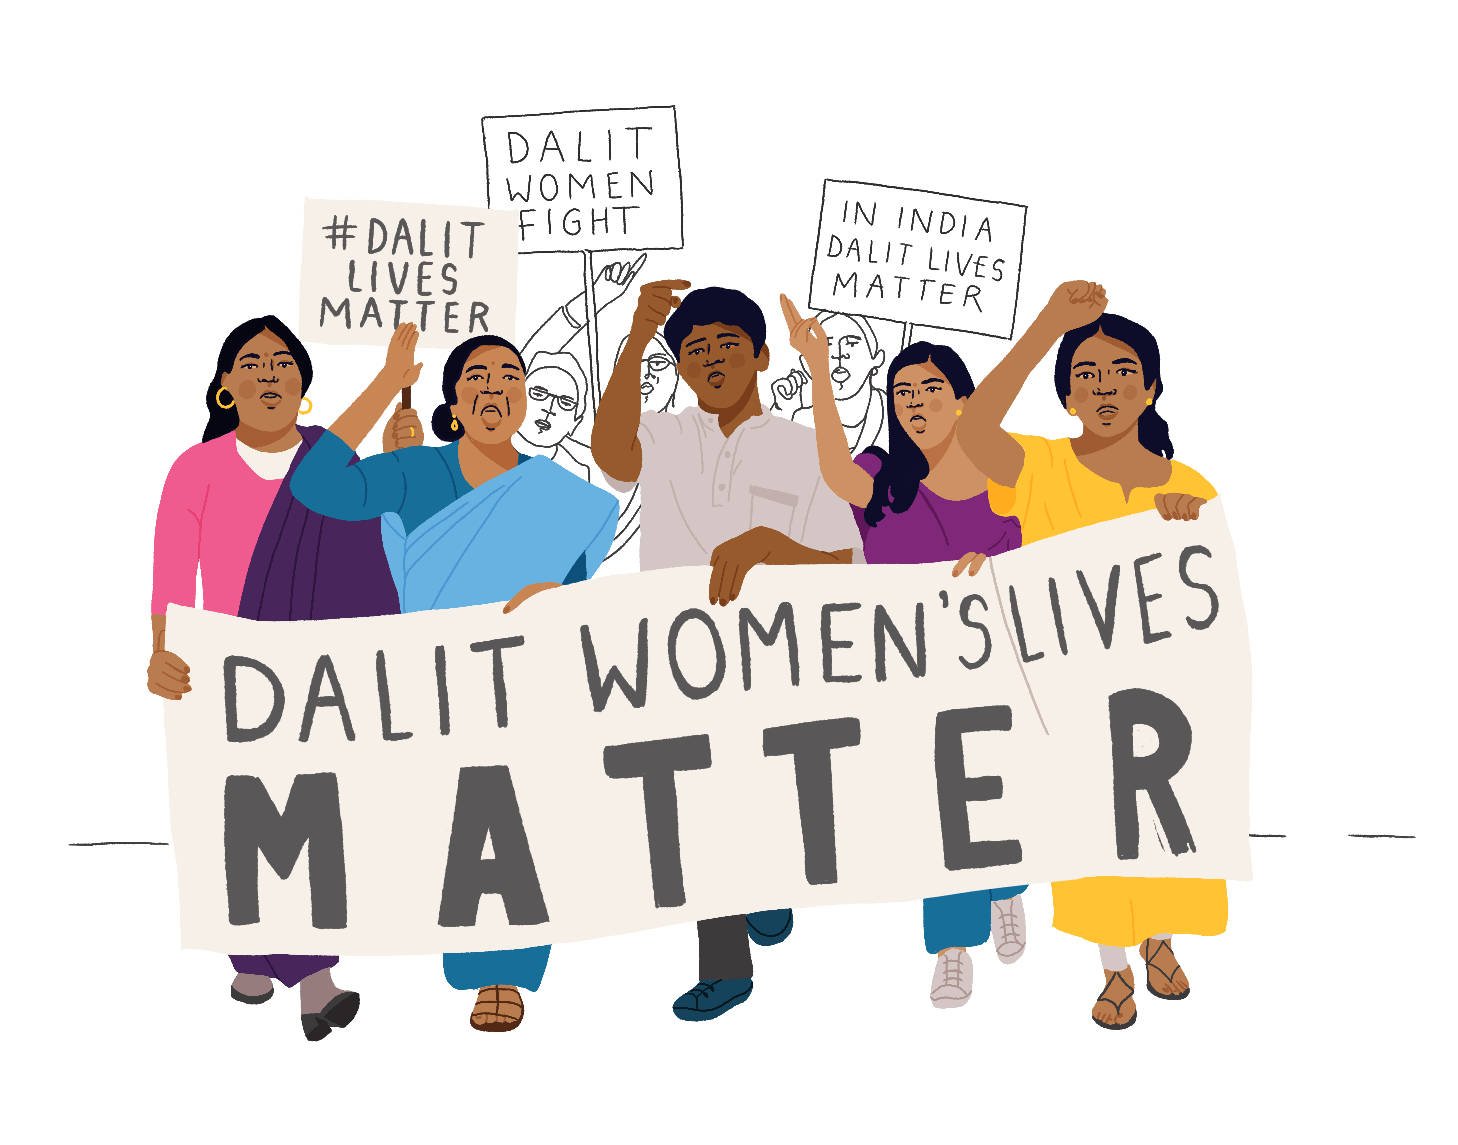 Illustration of women from Nepal protesting against backlash and for women's rights. They are holding banners with slogans such as 'Dalit women's lives matter' and 'Smash Braminical partiarchy'.